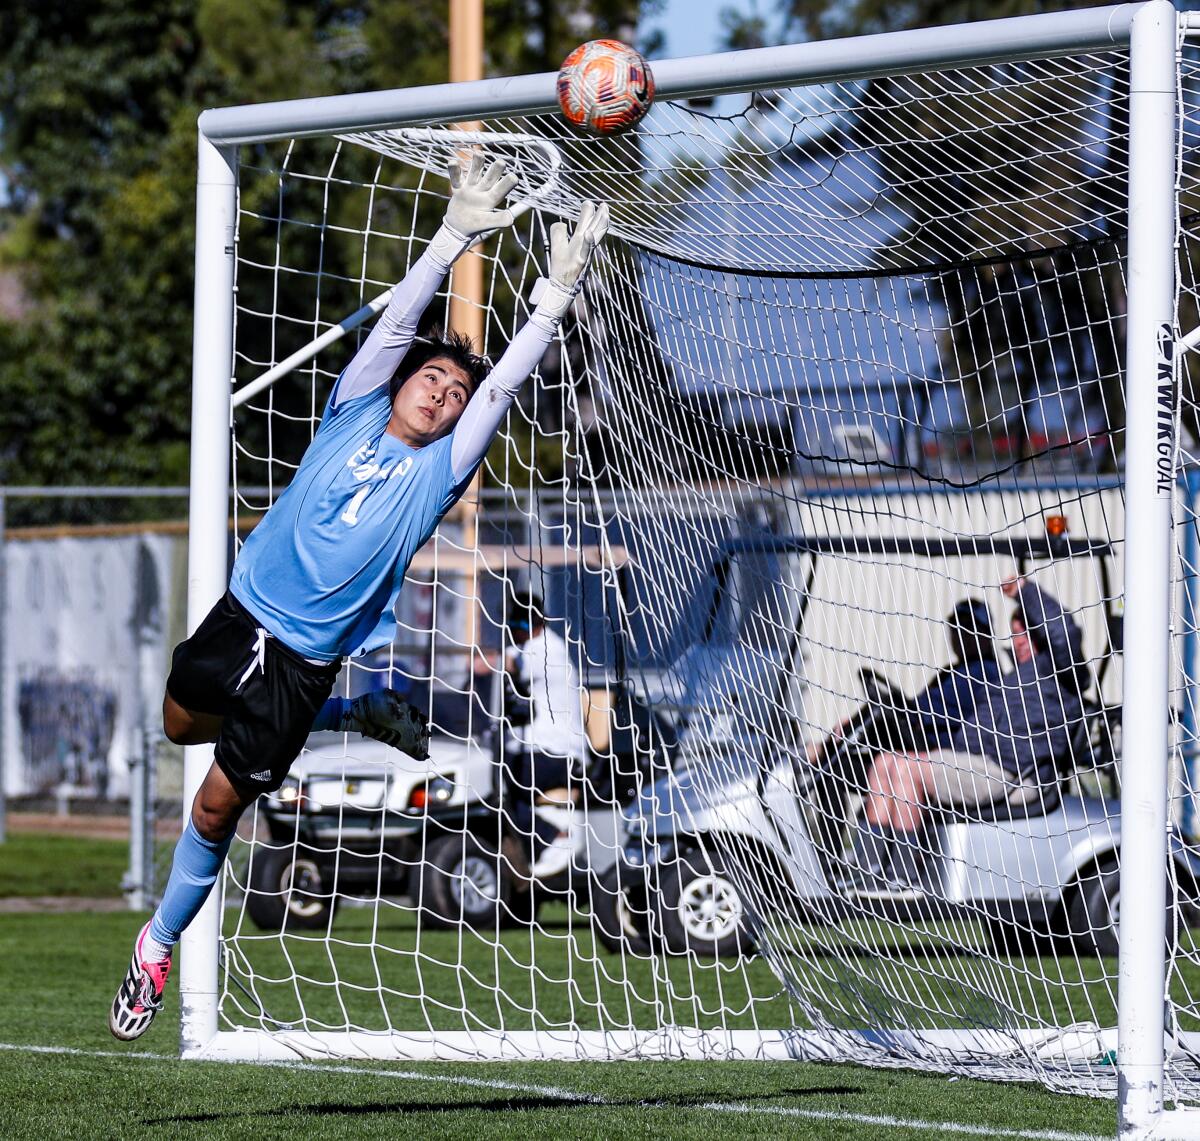 El Camino Real's Rey Lara is unable to stop game-winning goal from Birmingham's Steven Ramos that made the score 3-2.